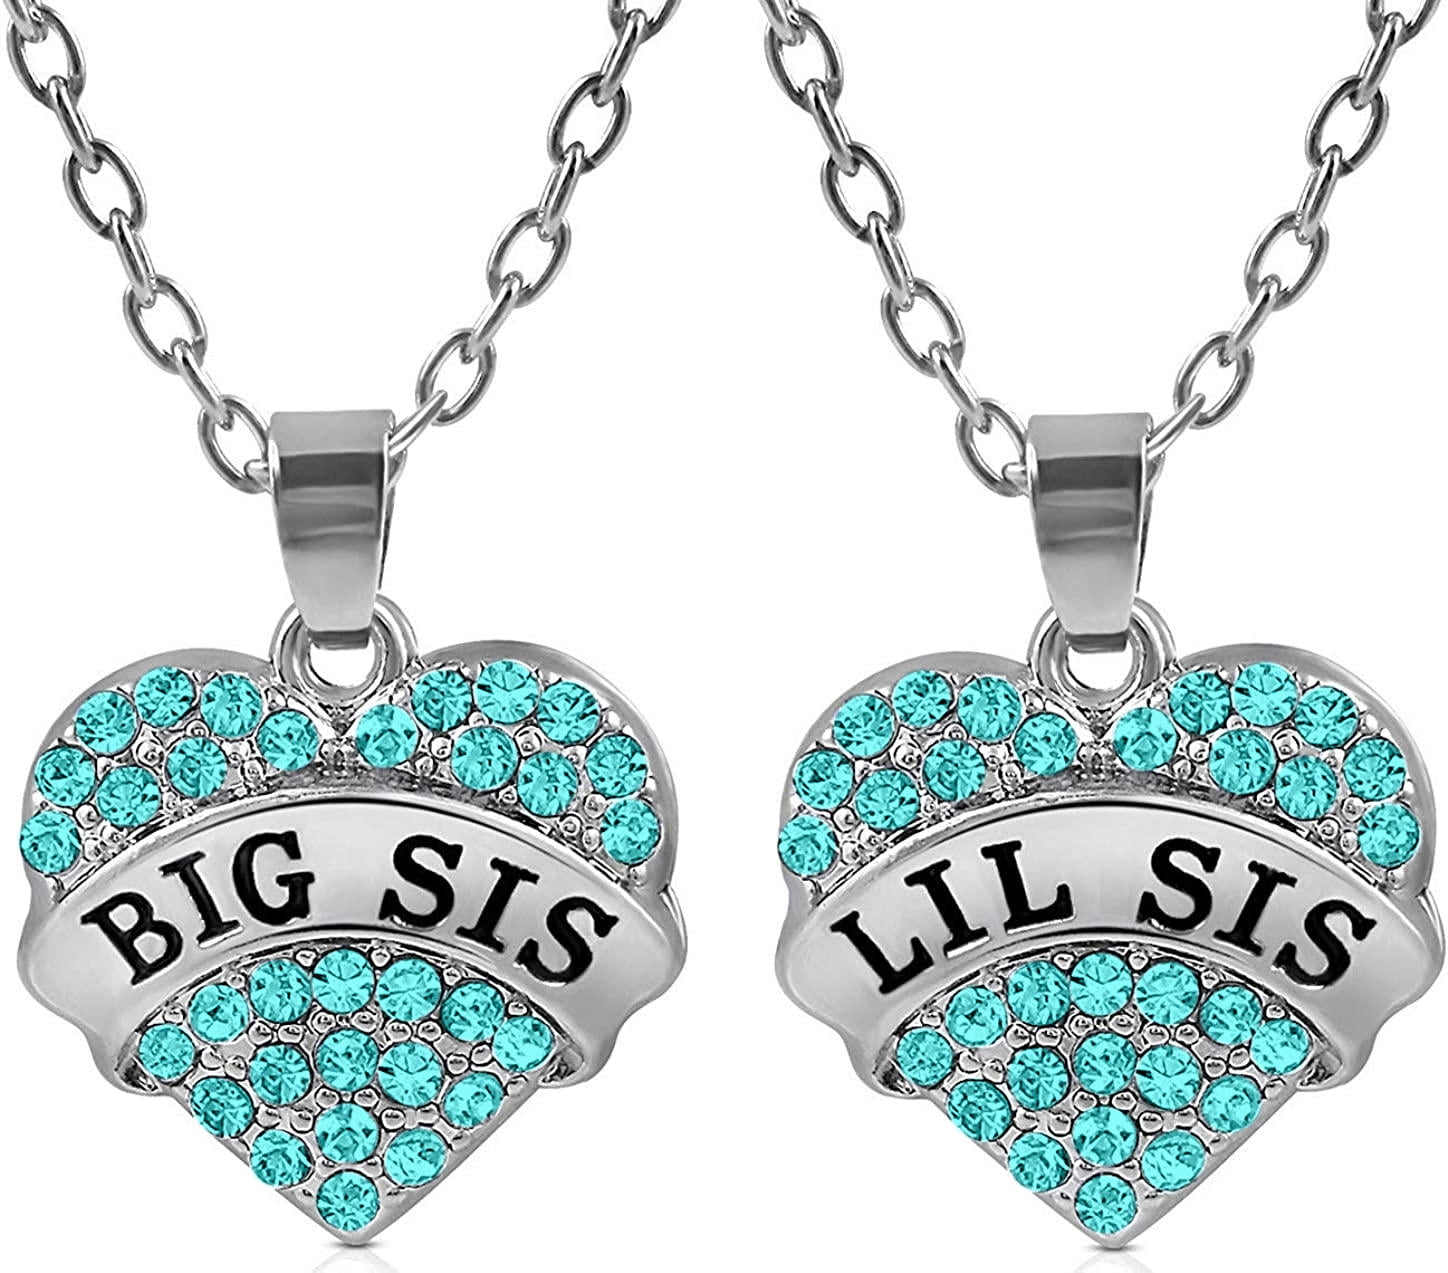 El Regalo 2 PCs Girls Sister Necklace Gifts, Big Sister Little Sister  Jewelry Gift for 2,Rainbow Broken Heart BFF Friendship Pendant for Kids  Teens Women - Price History